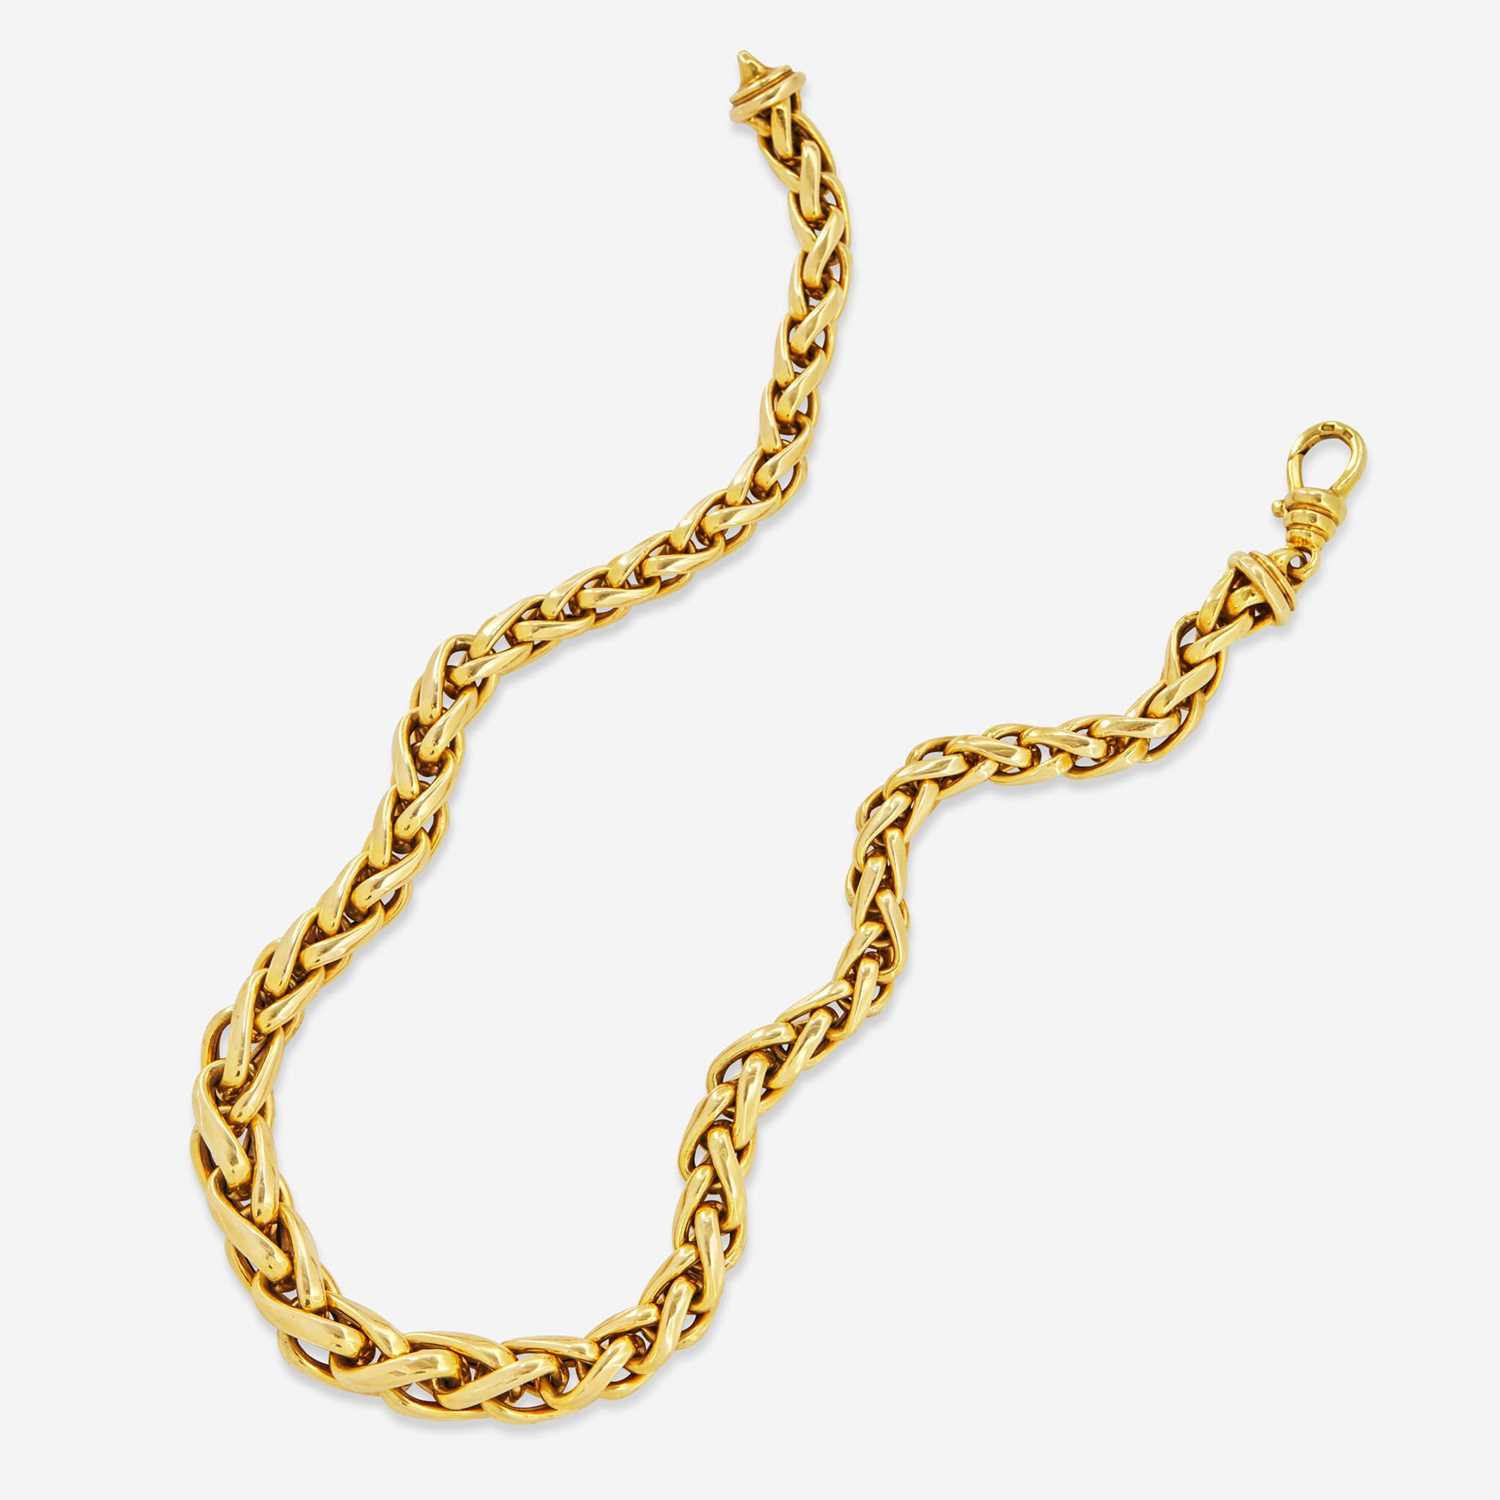 Lot 6 - A 14K Yellow Gold Necklace